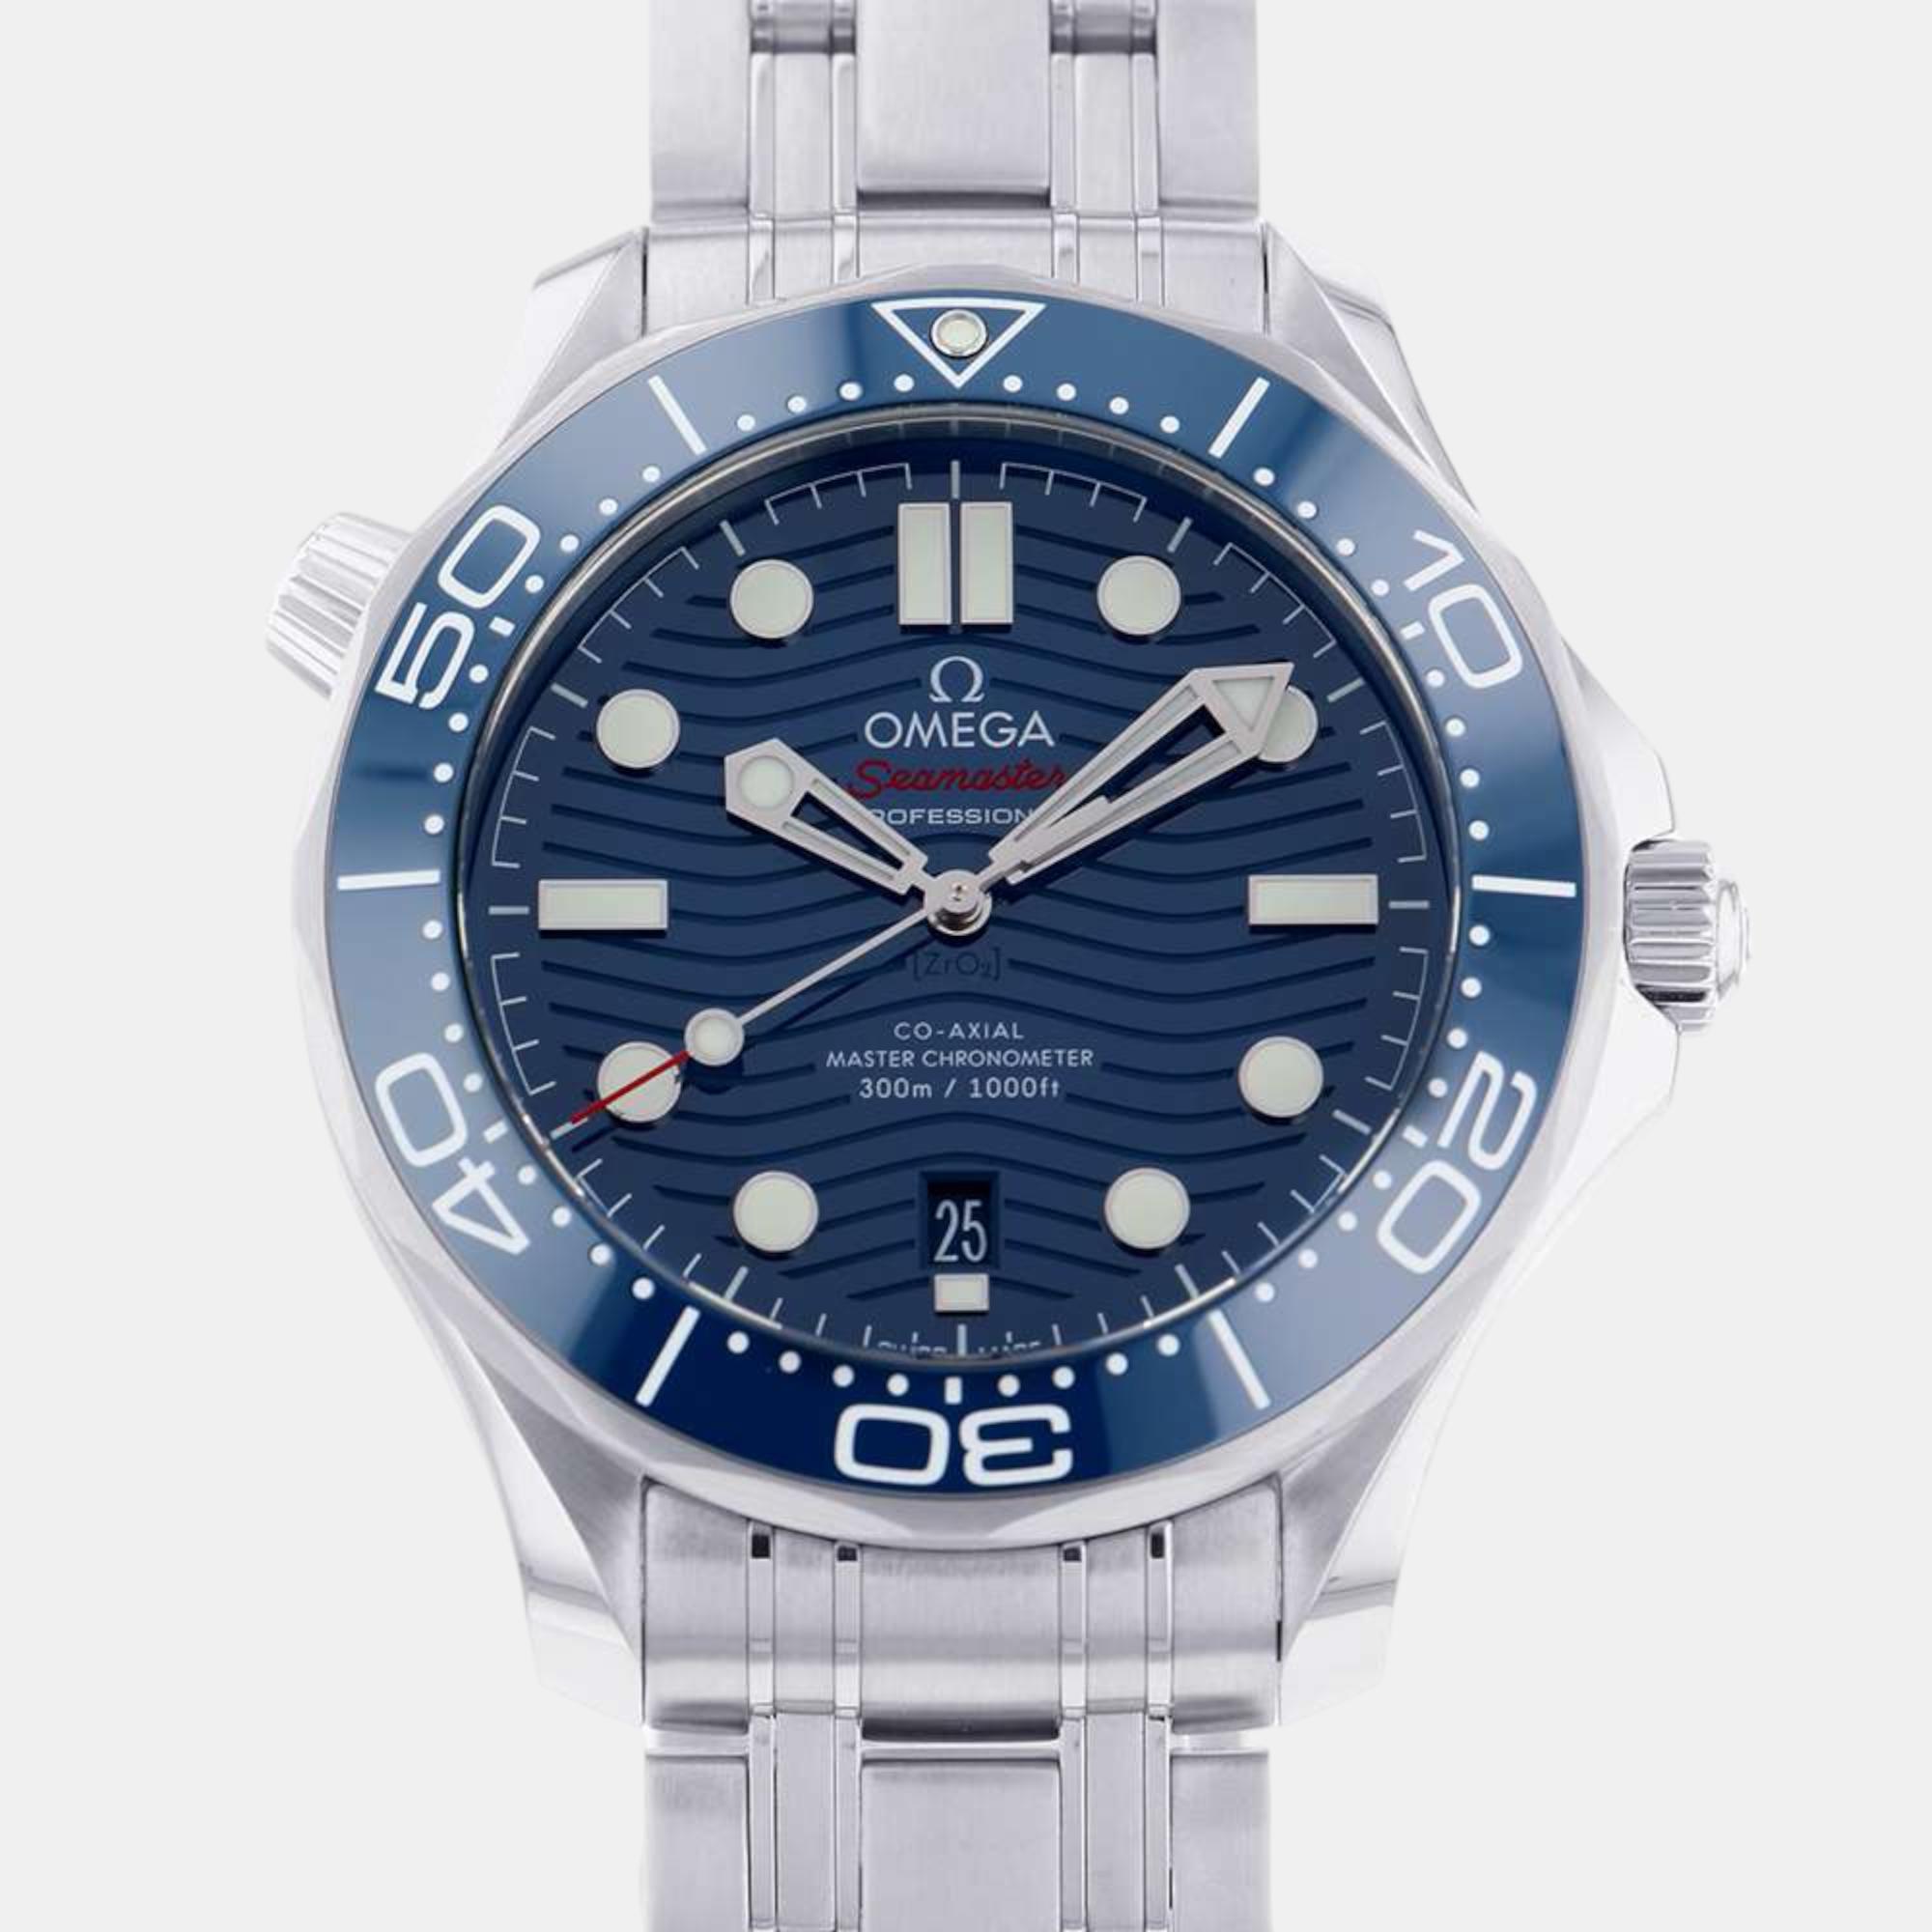 Omega blue stainless steel seamaster 210.30.42.20.03.001 automatic men's wristwatch 42 mm